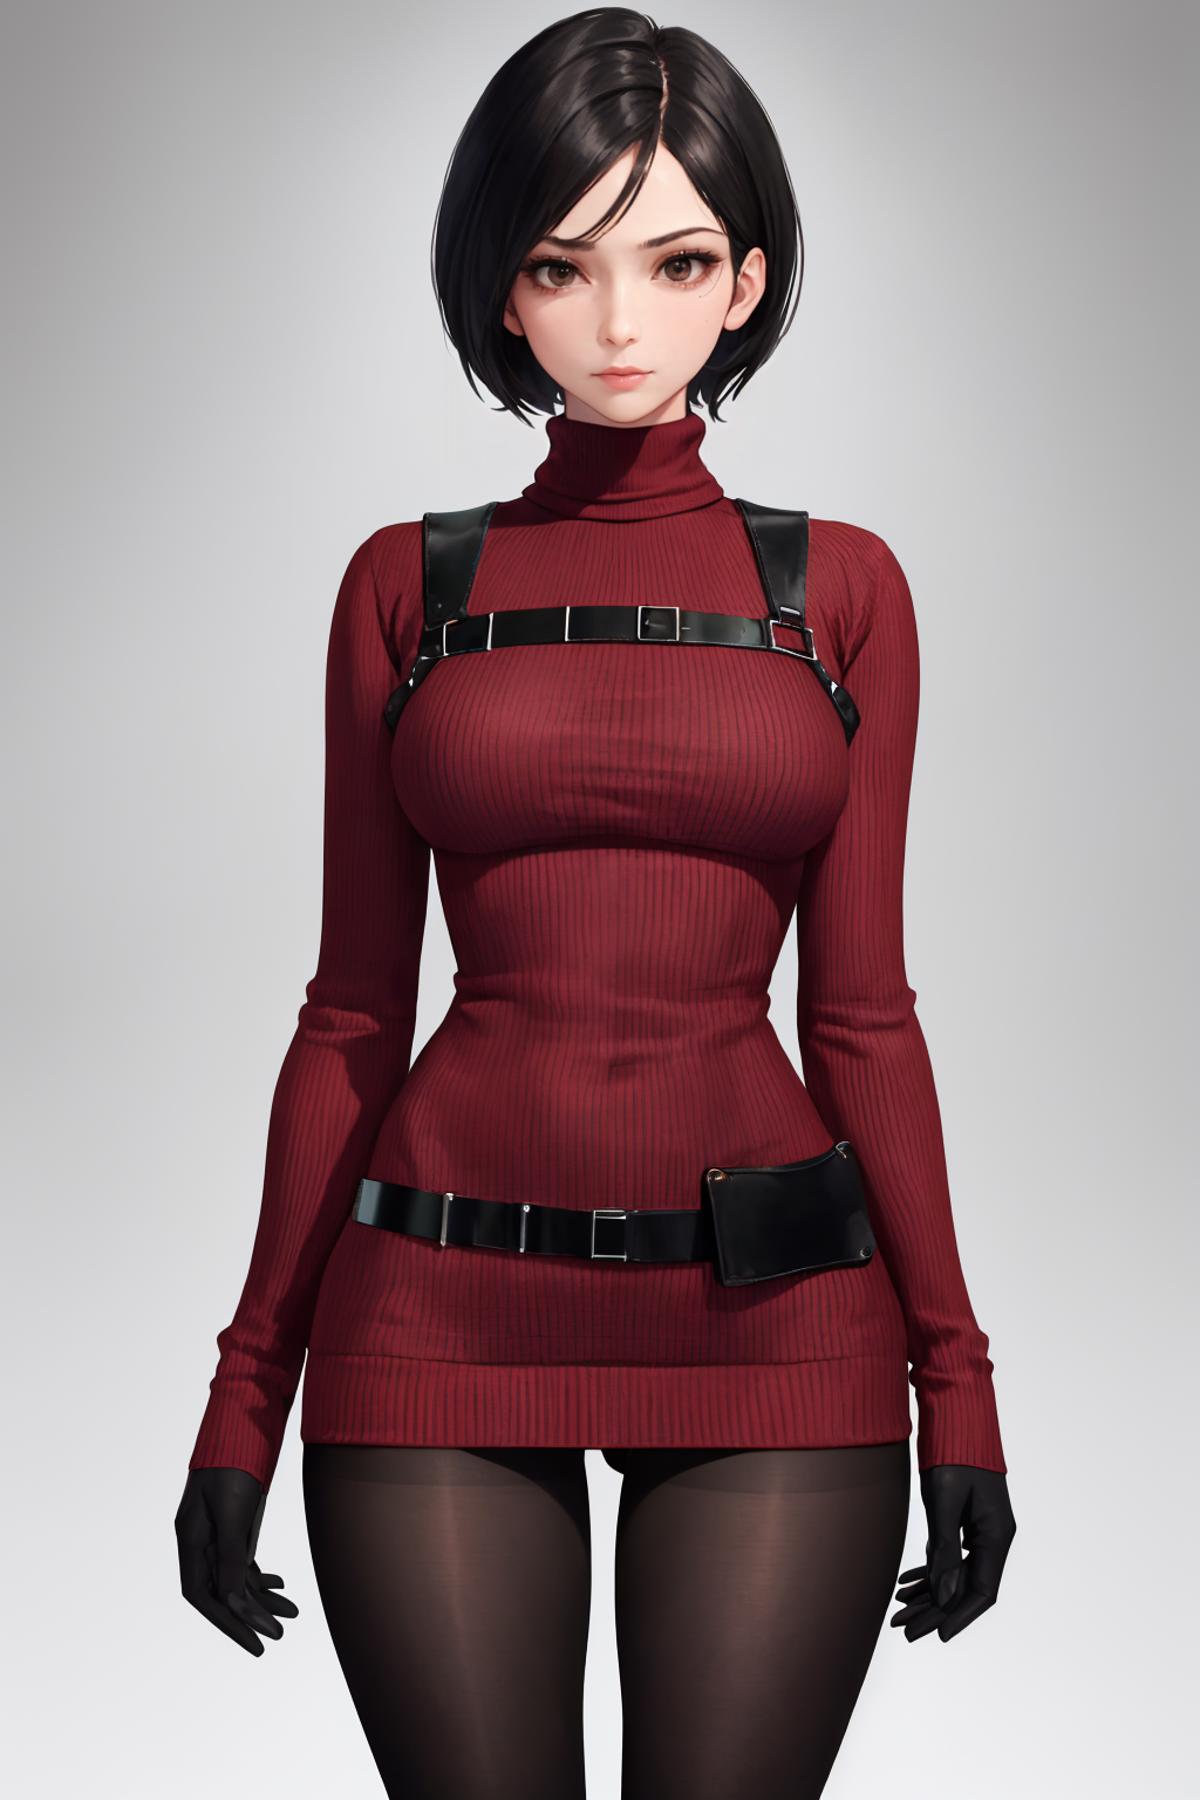 A 3D model of a woman wearing a red top, black belt, and black leather straps.